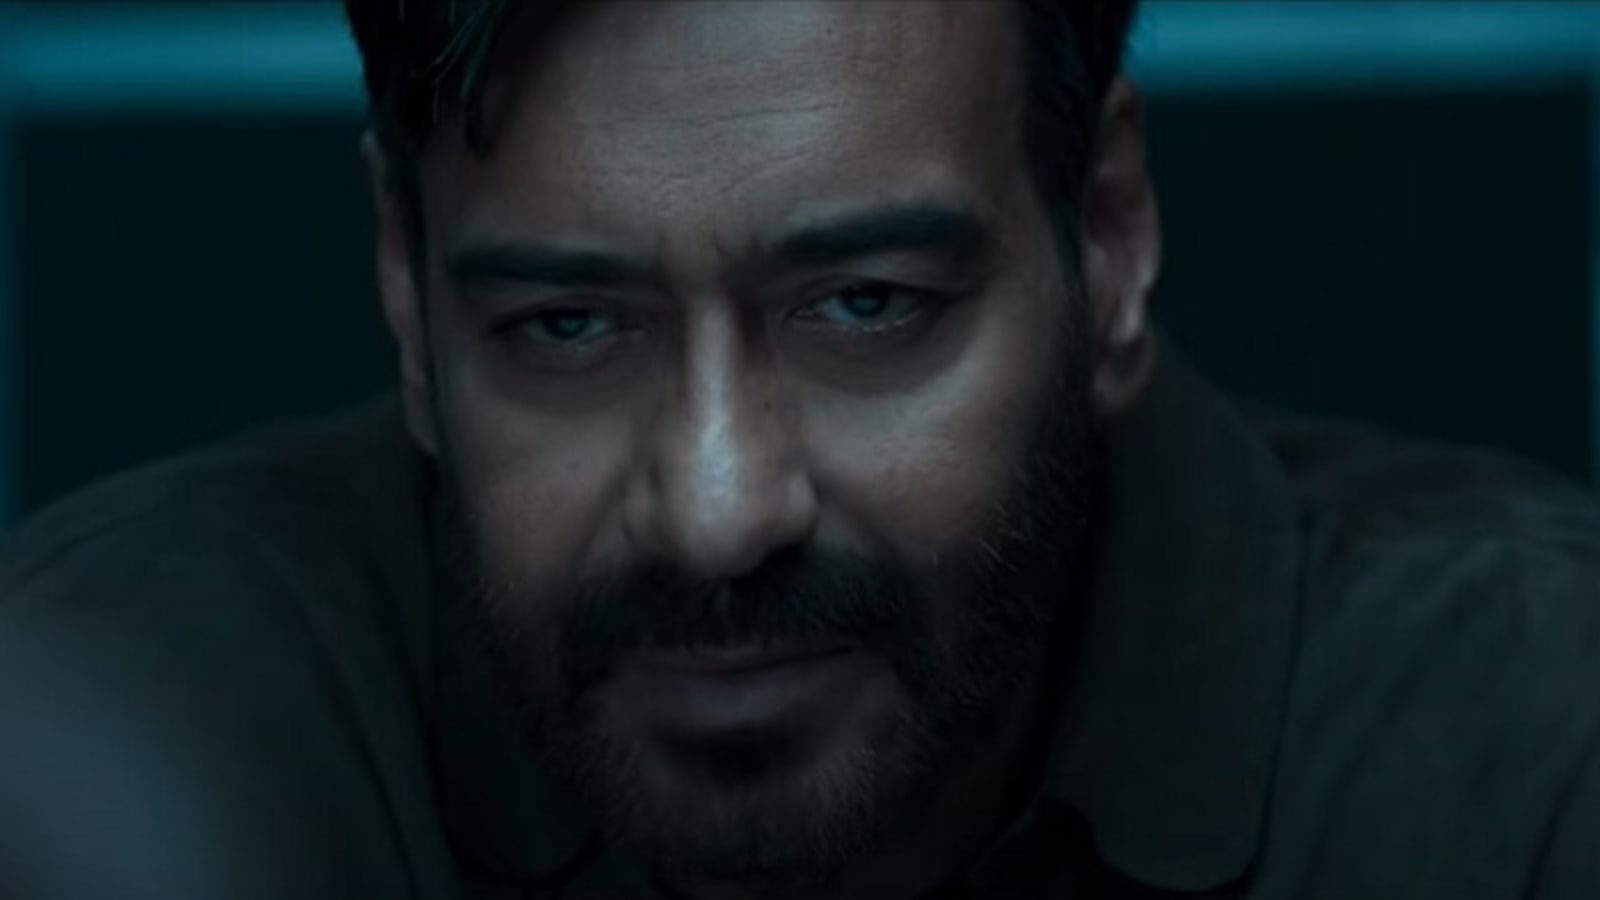 Hindi News: Rudra trailer: Ajay Devgn outfoxes killers, tries to save crumbling marriage with Esha Deol. Watch